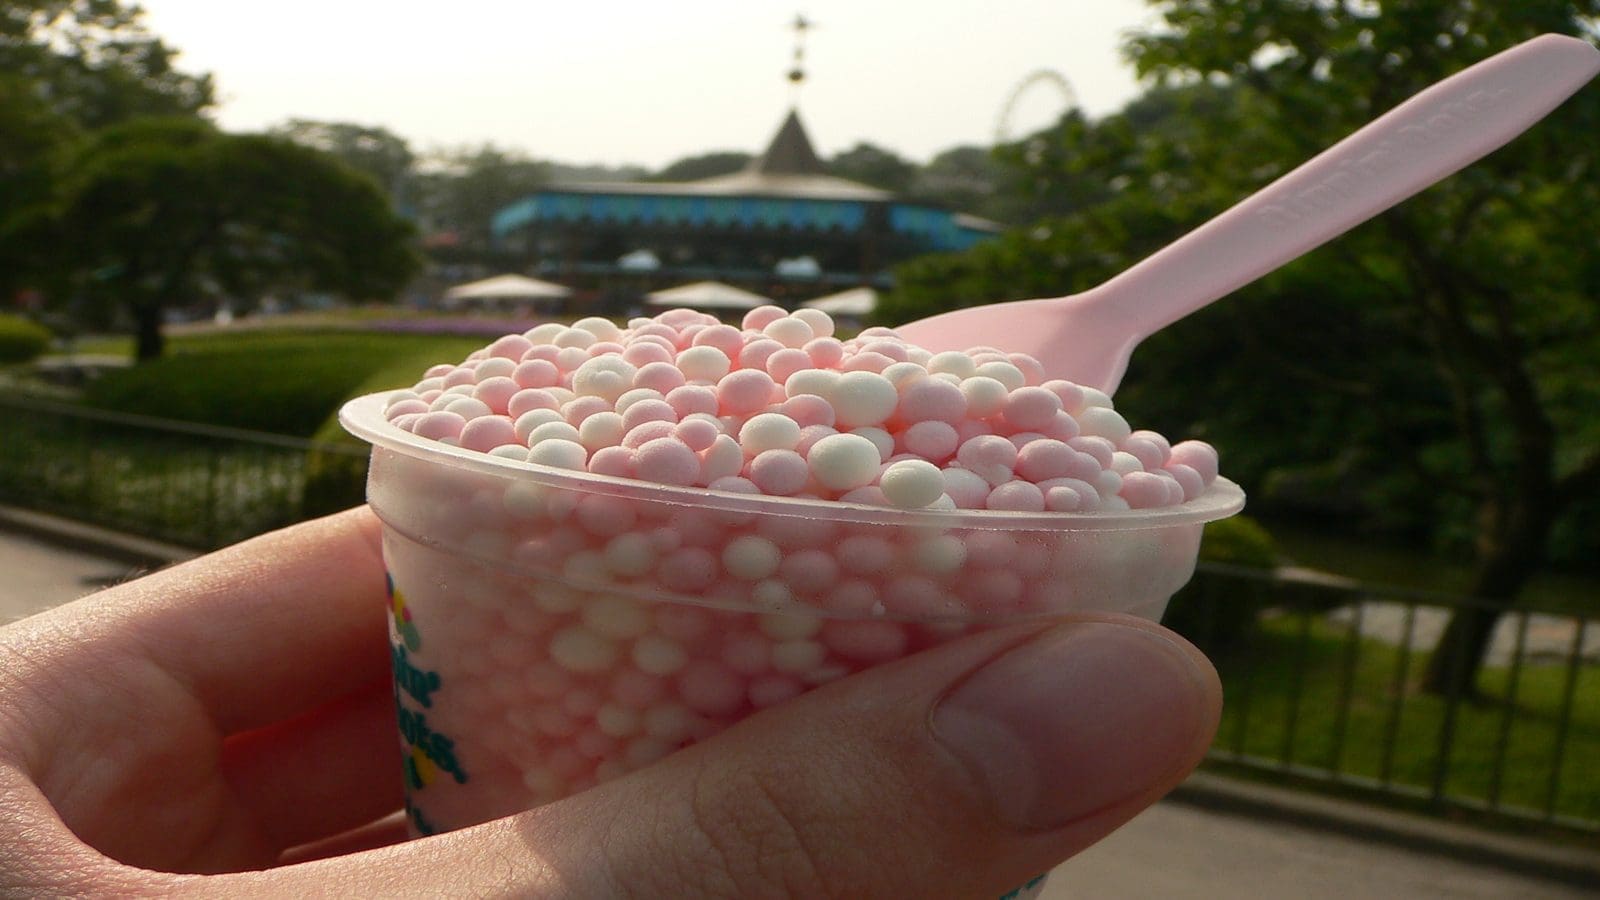 J&J Snack Foods acquires Dippin’ Dots to strengthen position in the US market